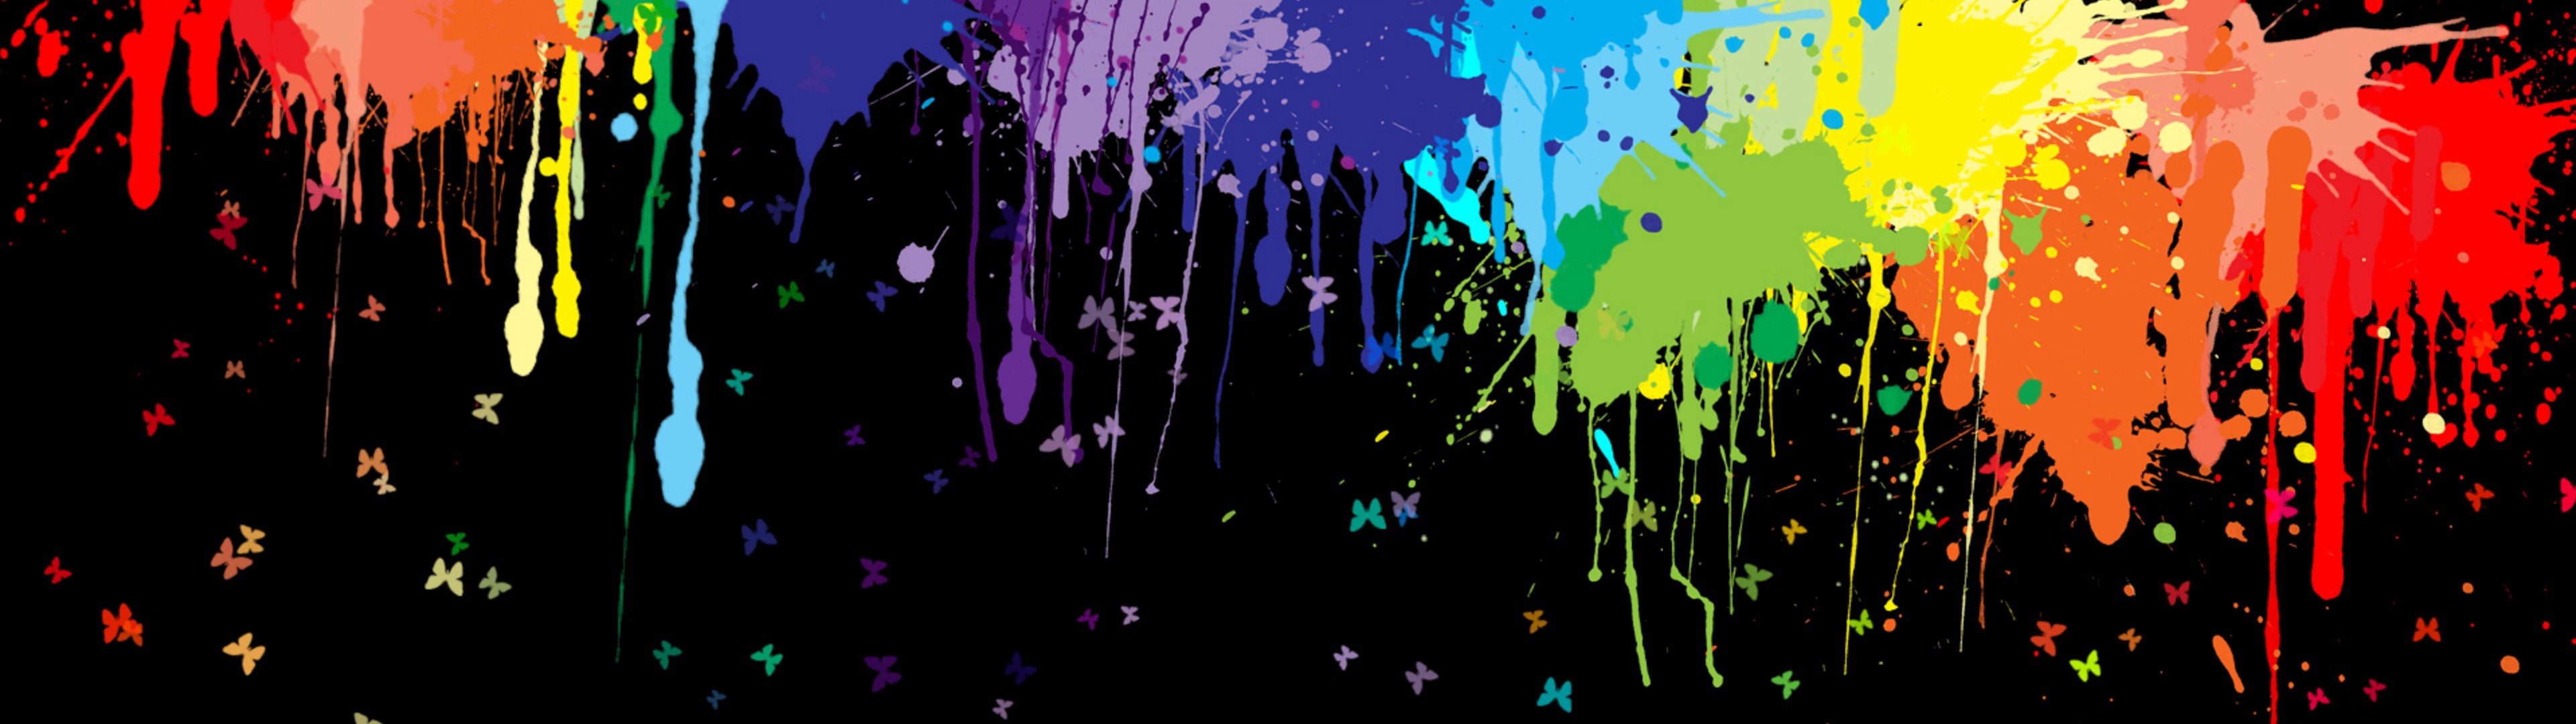 paint Splatter, Colorful, Multiple Display, Butterfly Wallpaper